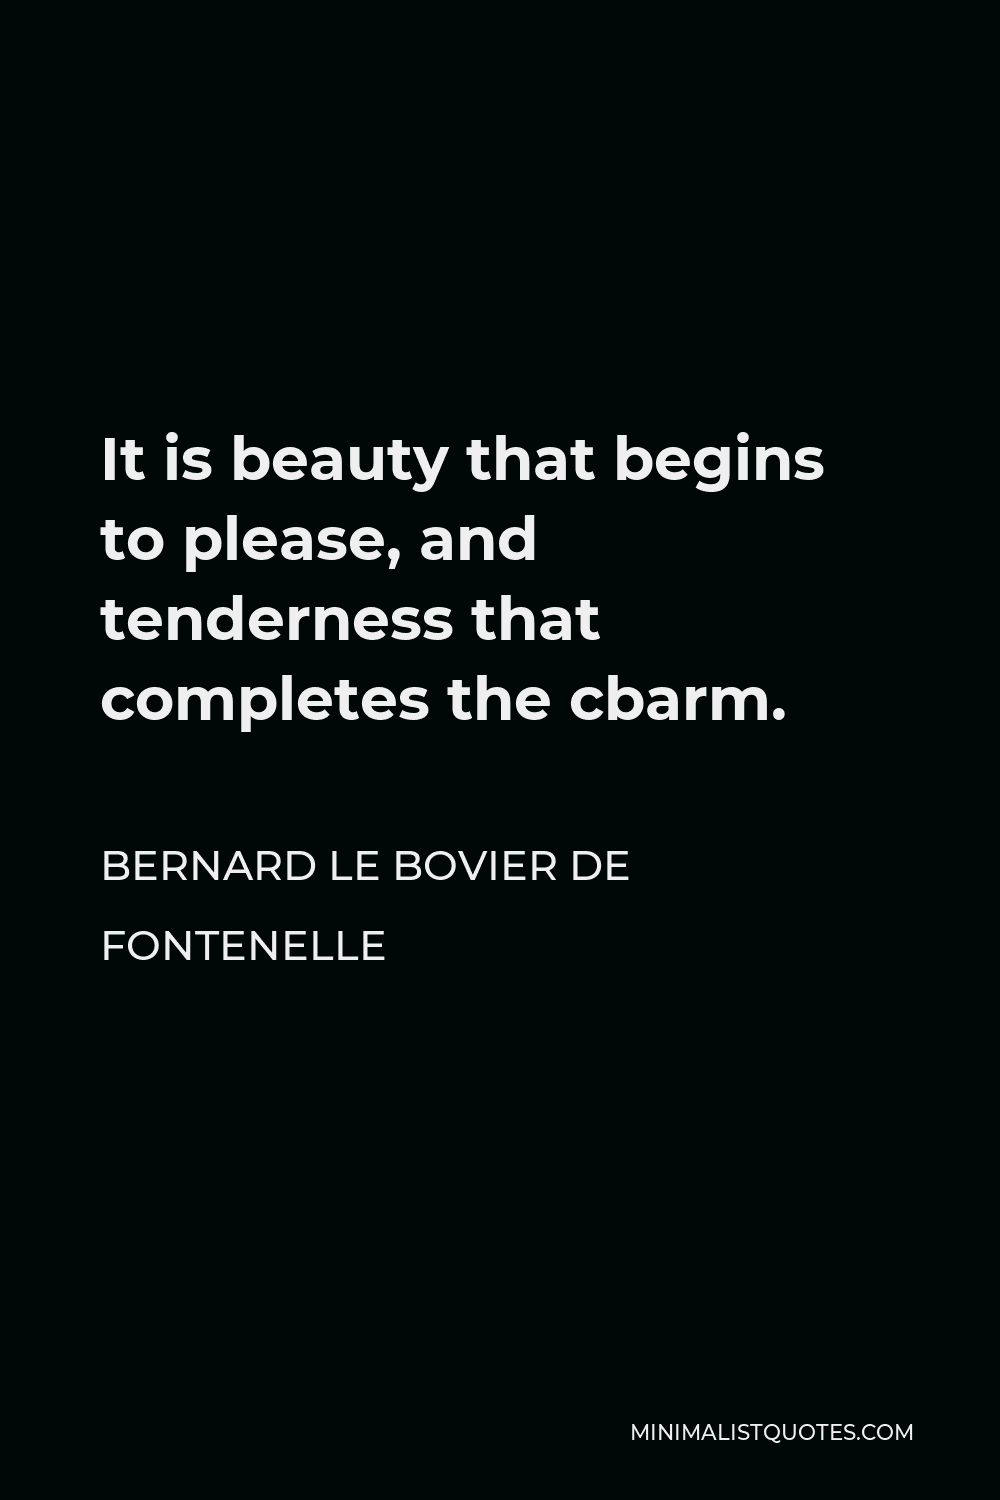 Bernard le Bovier de Fontenelle Quote - It is beauty that begins to please, and tenderness that completes the cbarm.